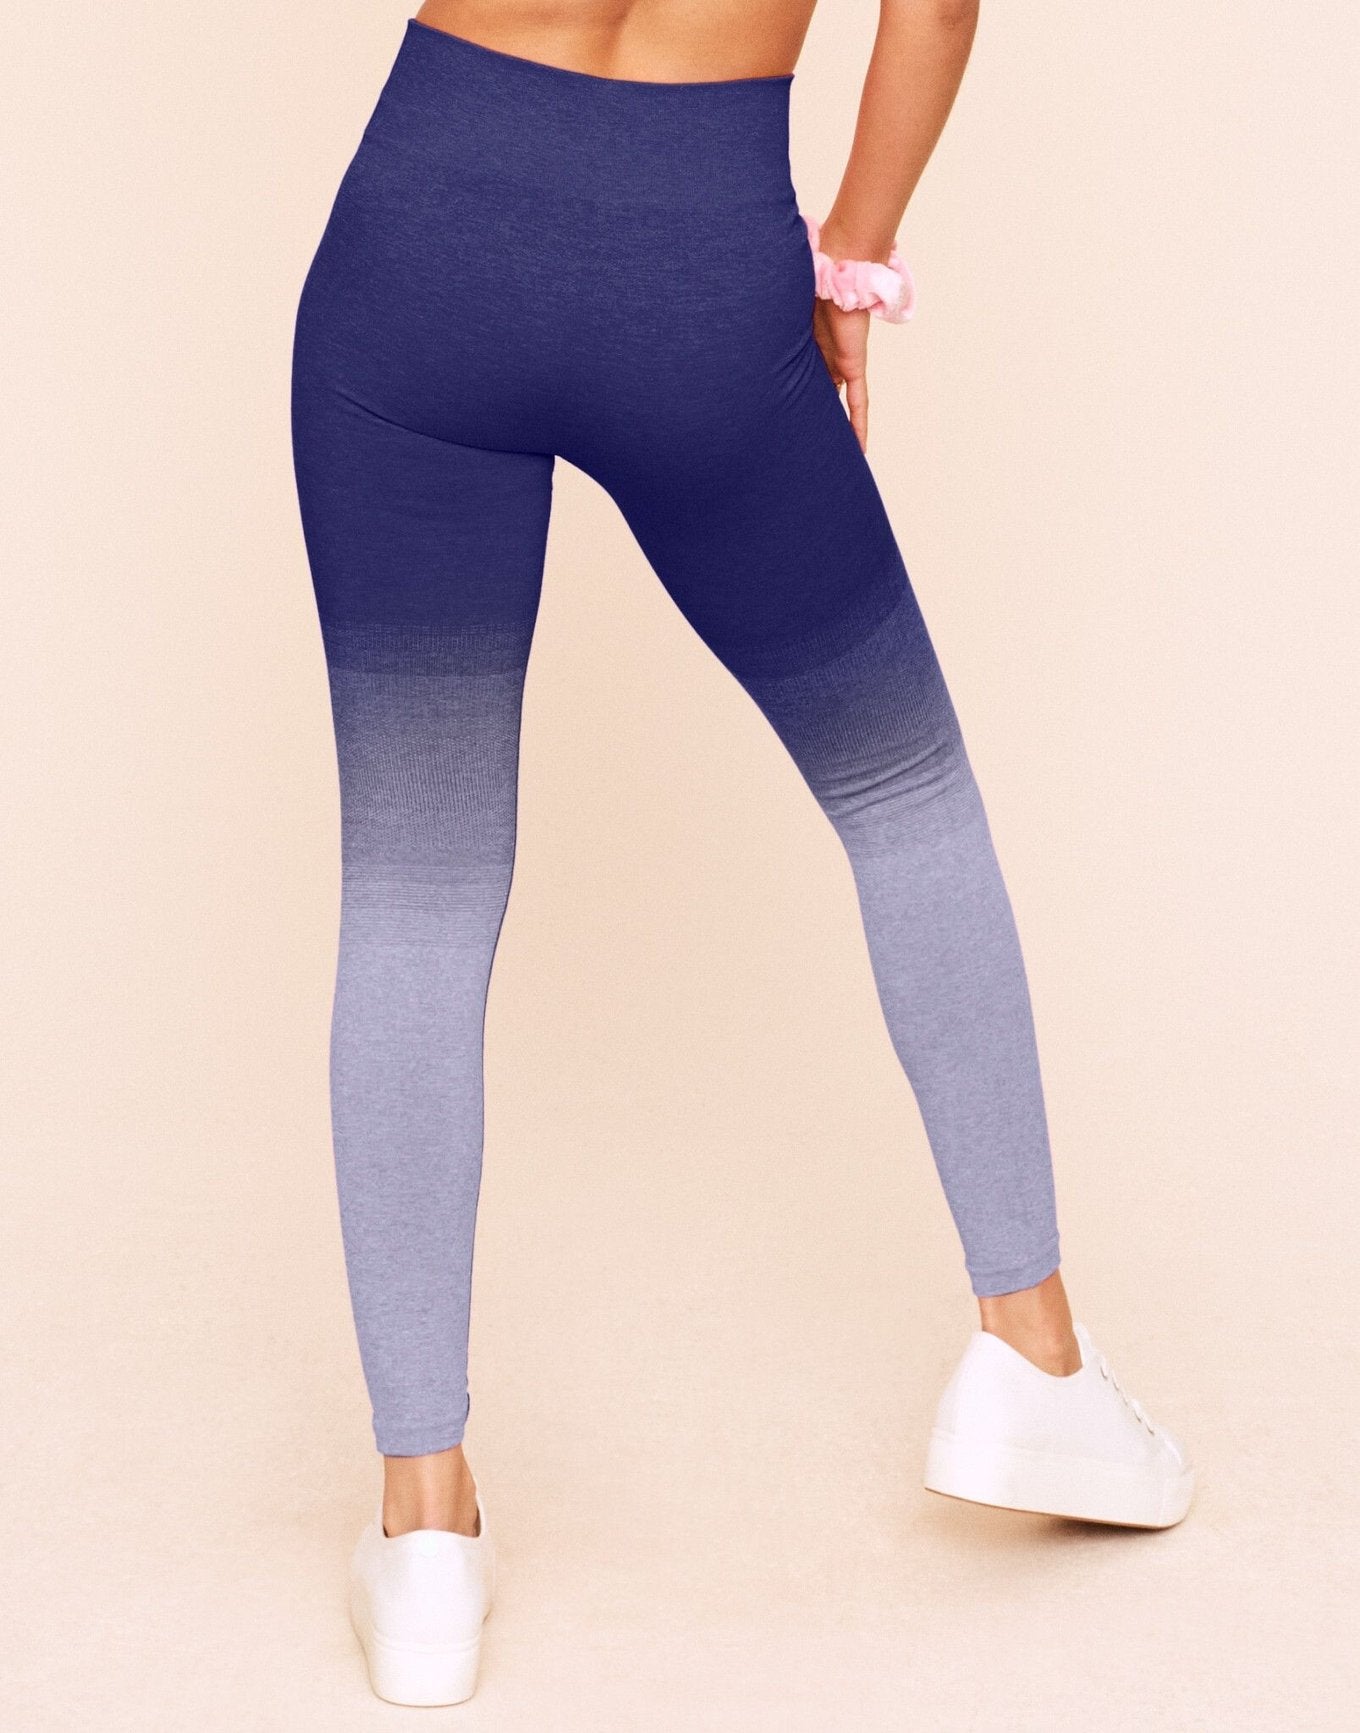 Earth Republic Lilah Ombre Full Legging Leggings in color Solid 02 - Ombre Navy and shape legging